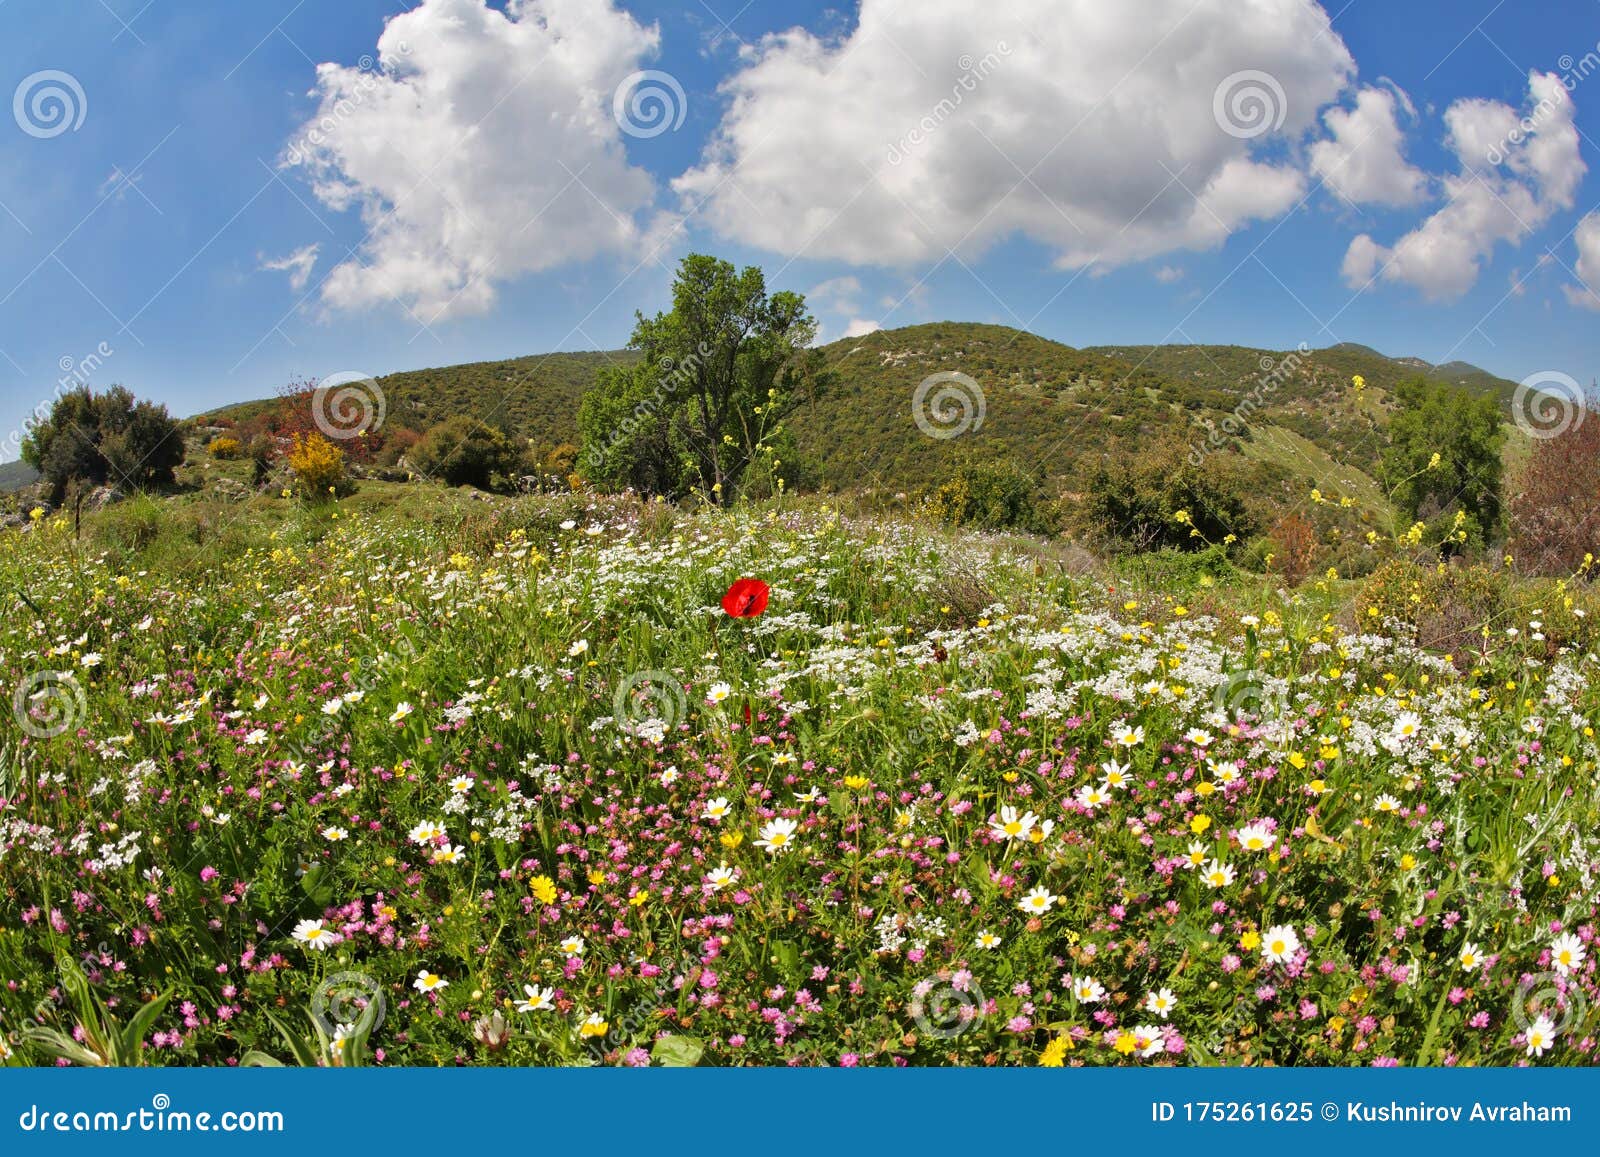 Blossoming Spring Meadow with Field Flower Stock Image - Image of